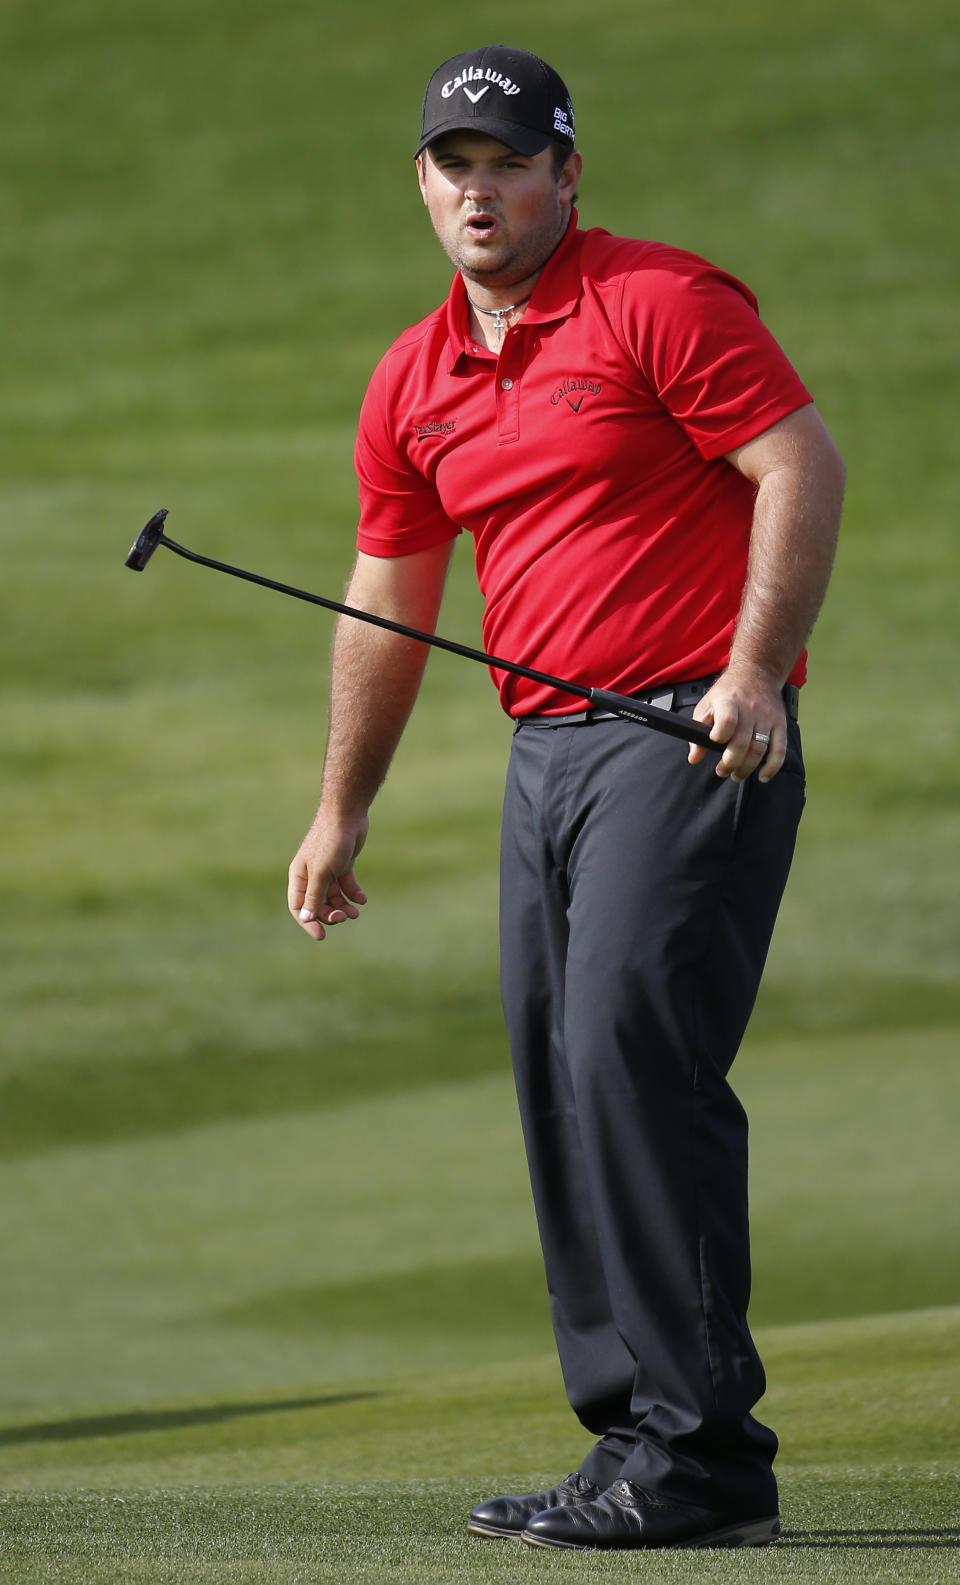 Patrick Reed reacts after missing his par putt on the seventh hole hole during the final round of the Humana Challenge golf tournament on the Palmer Private course at PGA West, Sunday, Jan. 19, 2014, in La Quinta, Calif. (AP Photo/Matt York)